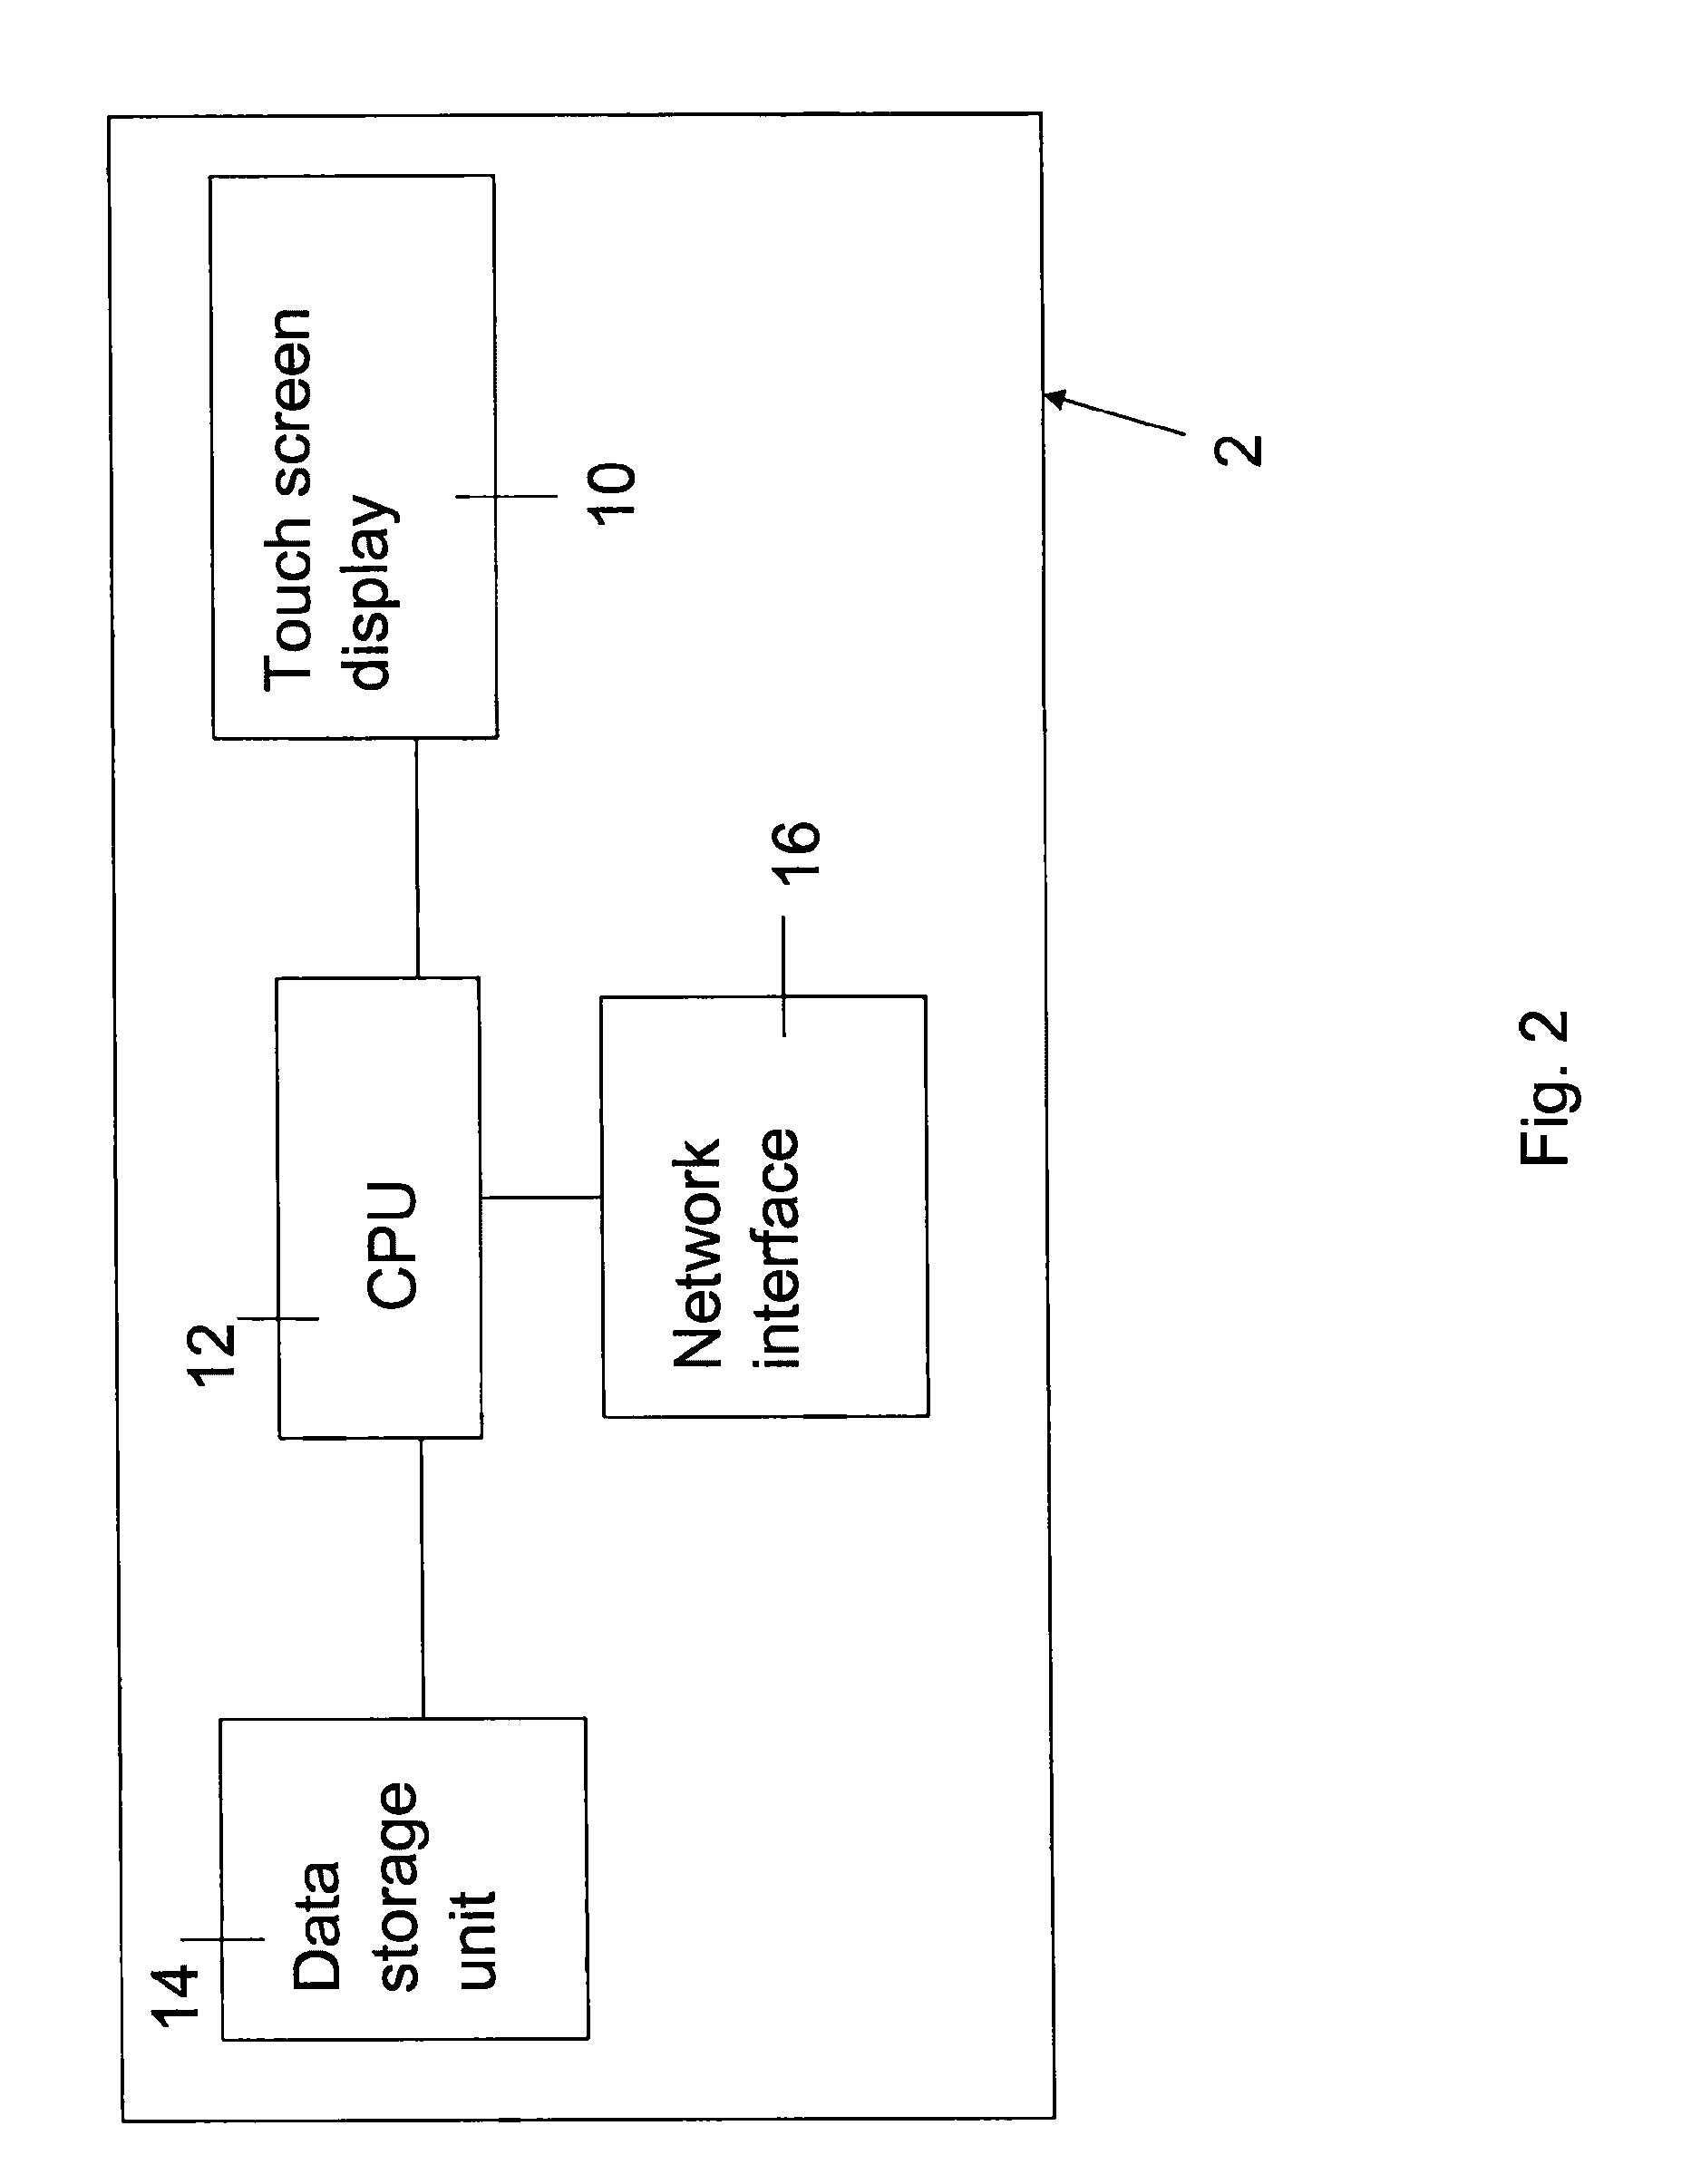 System for interacting with an electronic program guide